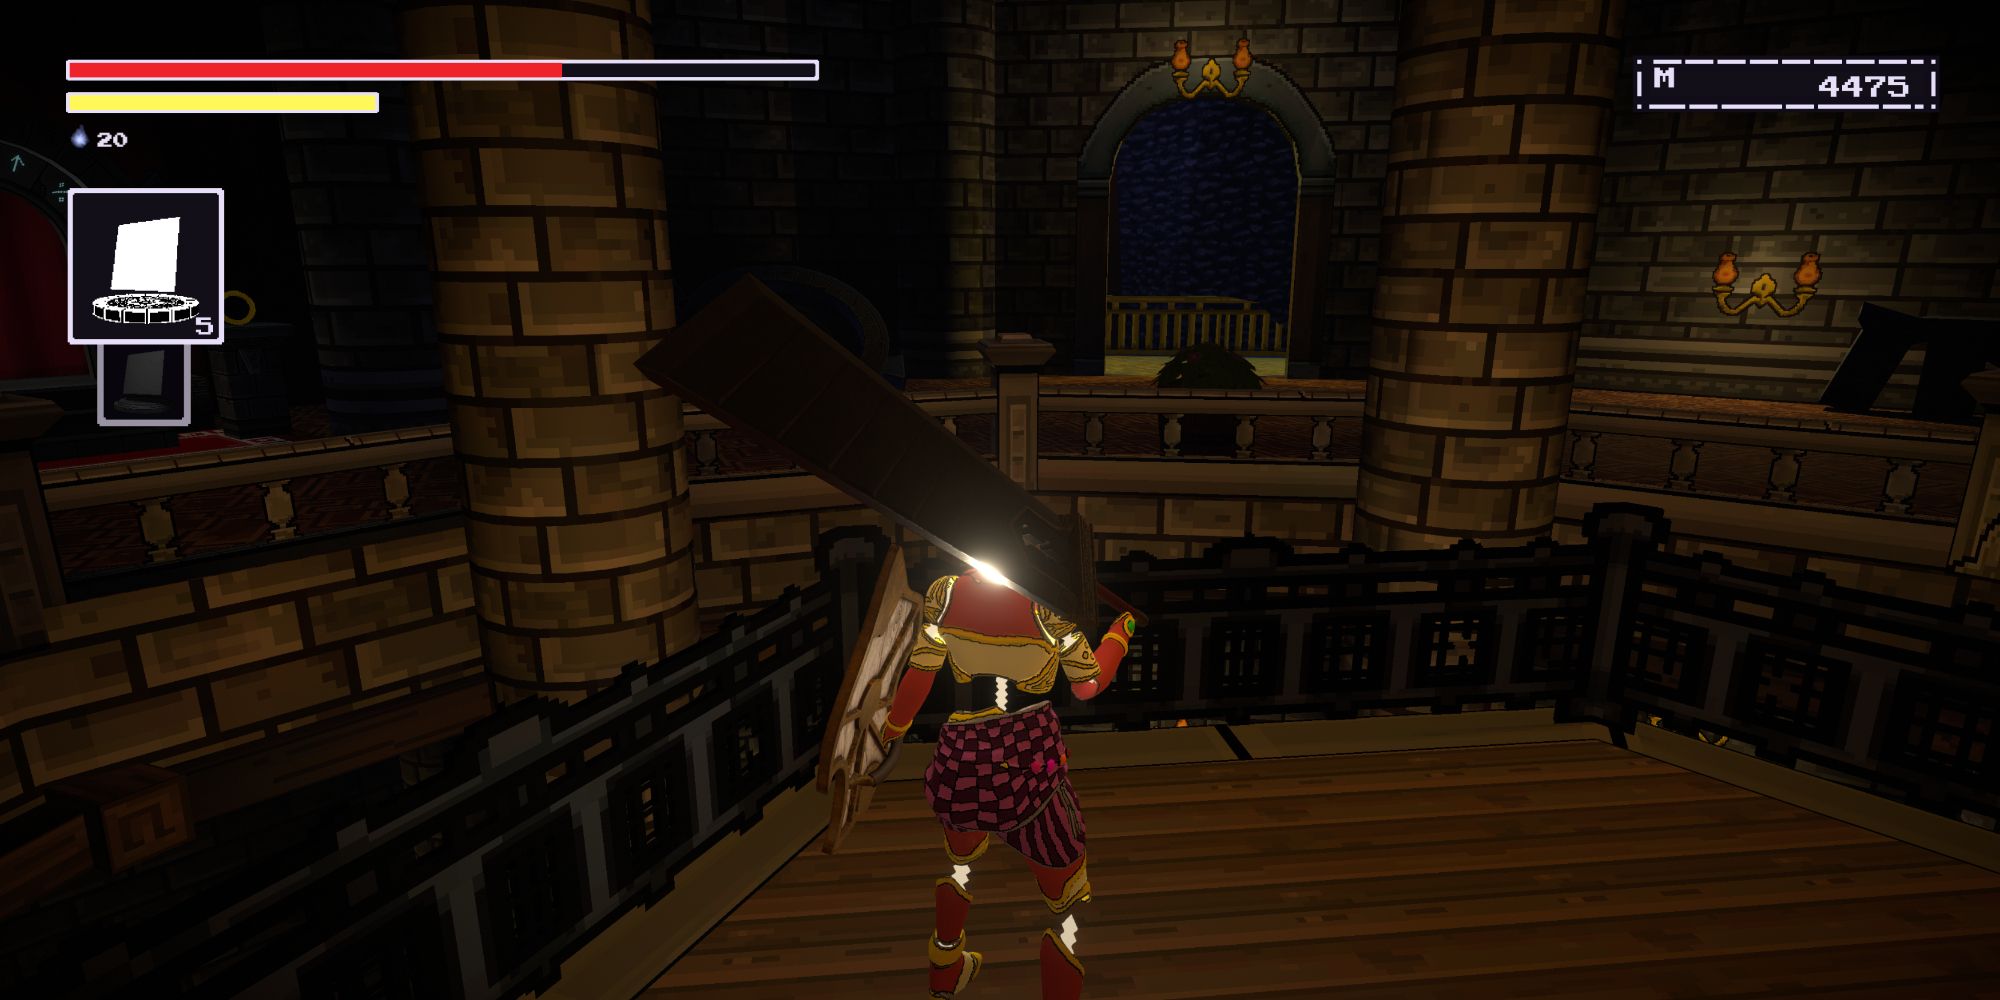 The South Exit of The Theater's top floor in The Last Hero of Nostalgaia